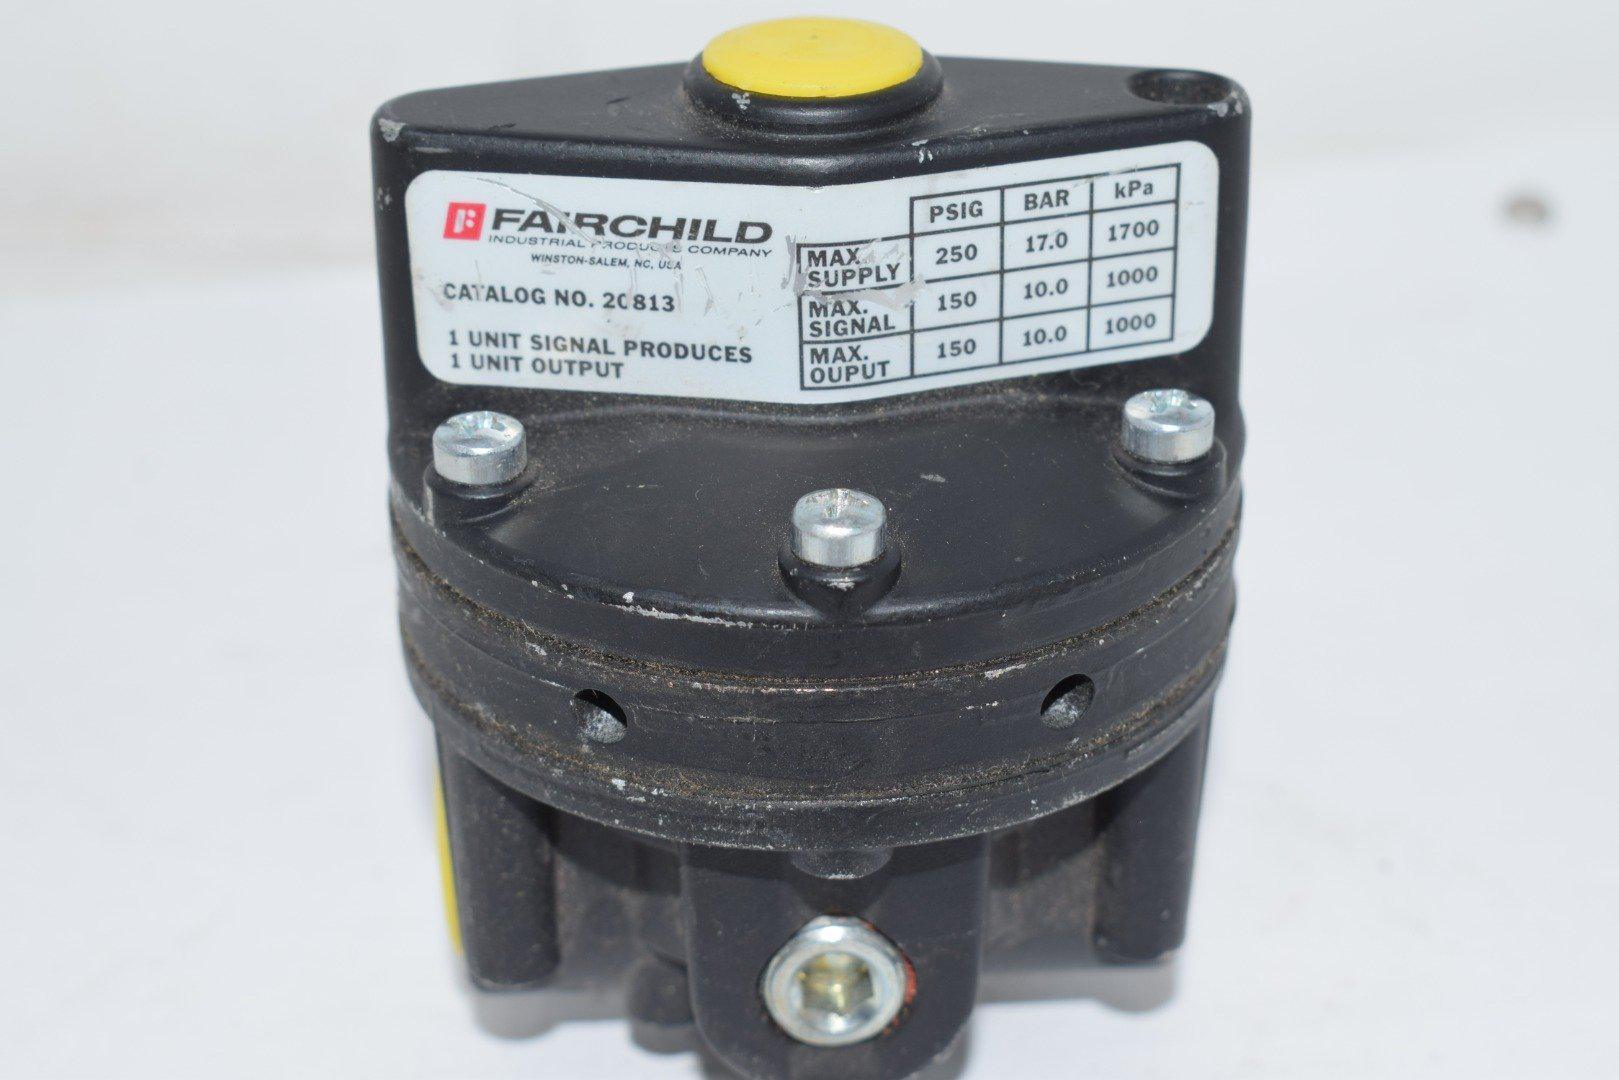 NEW FAIRCHILD 20813 PNEUMATIC VOLUME BOOSTER RELAY 1:1/1:6 TO 5:1 OUTPUT  Condition_New, Regulators